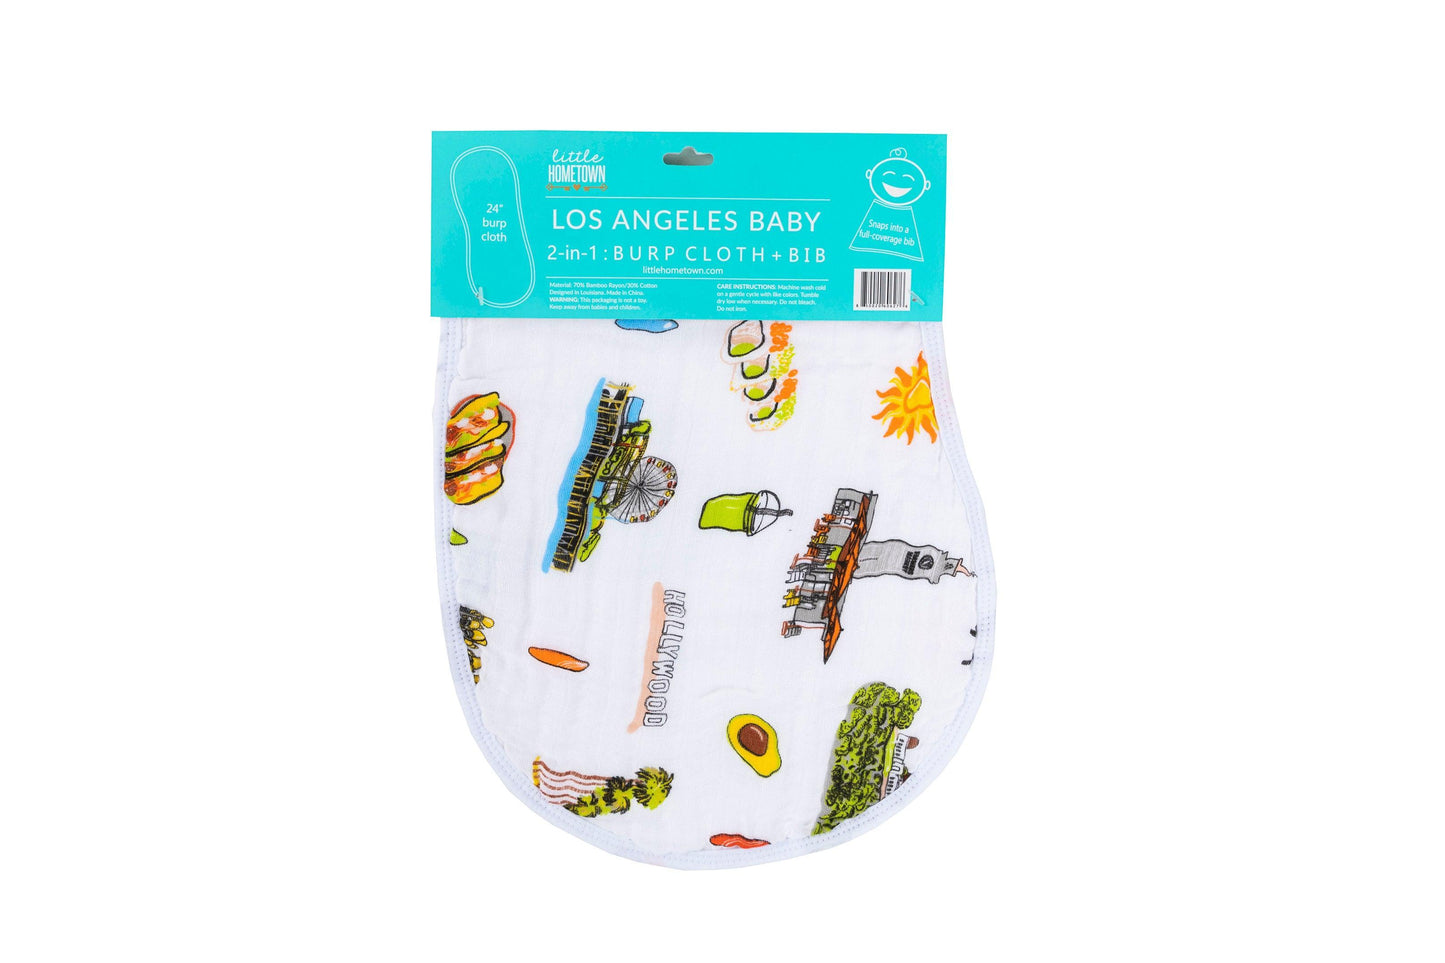 Baby bib and burp cloth set with "Los Angeles Baby" text, featuring city icons in pastel colors.